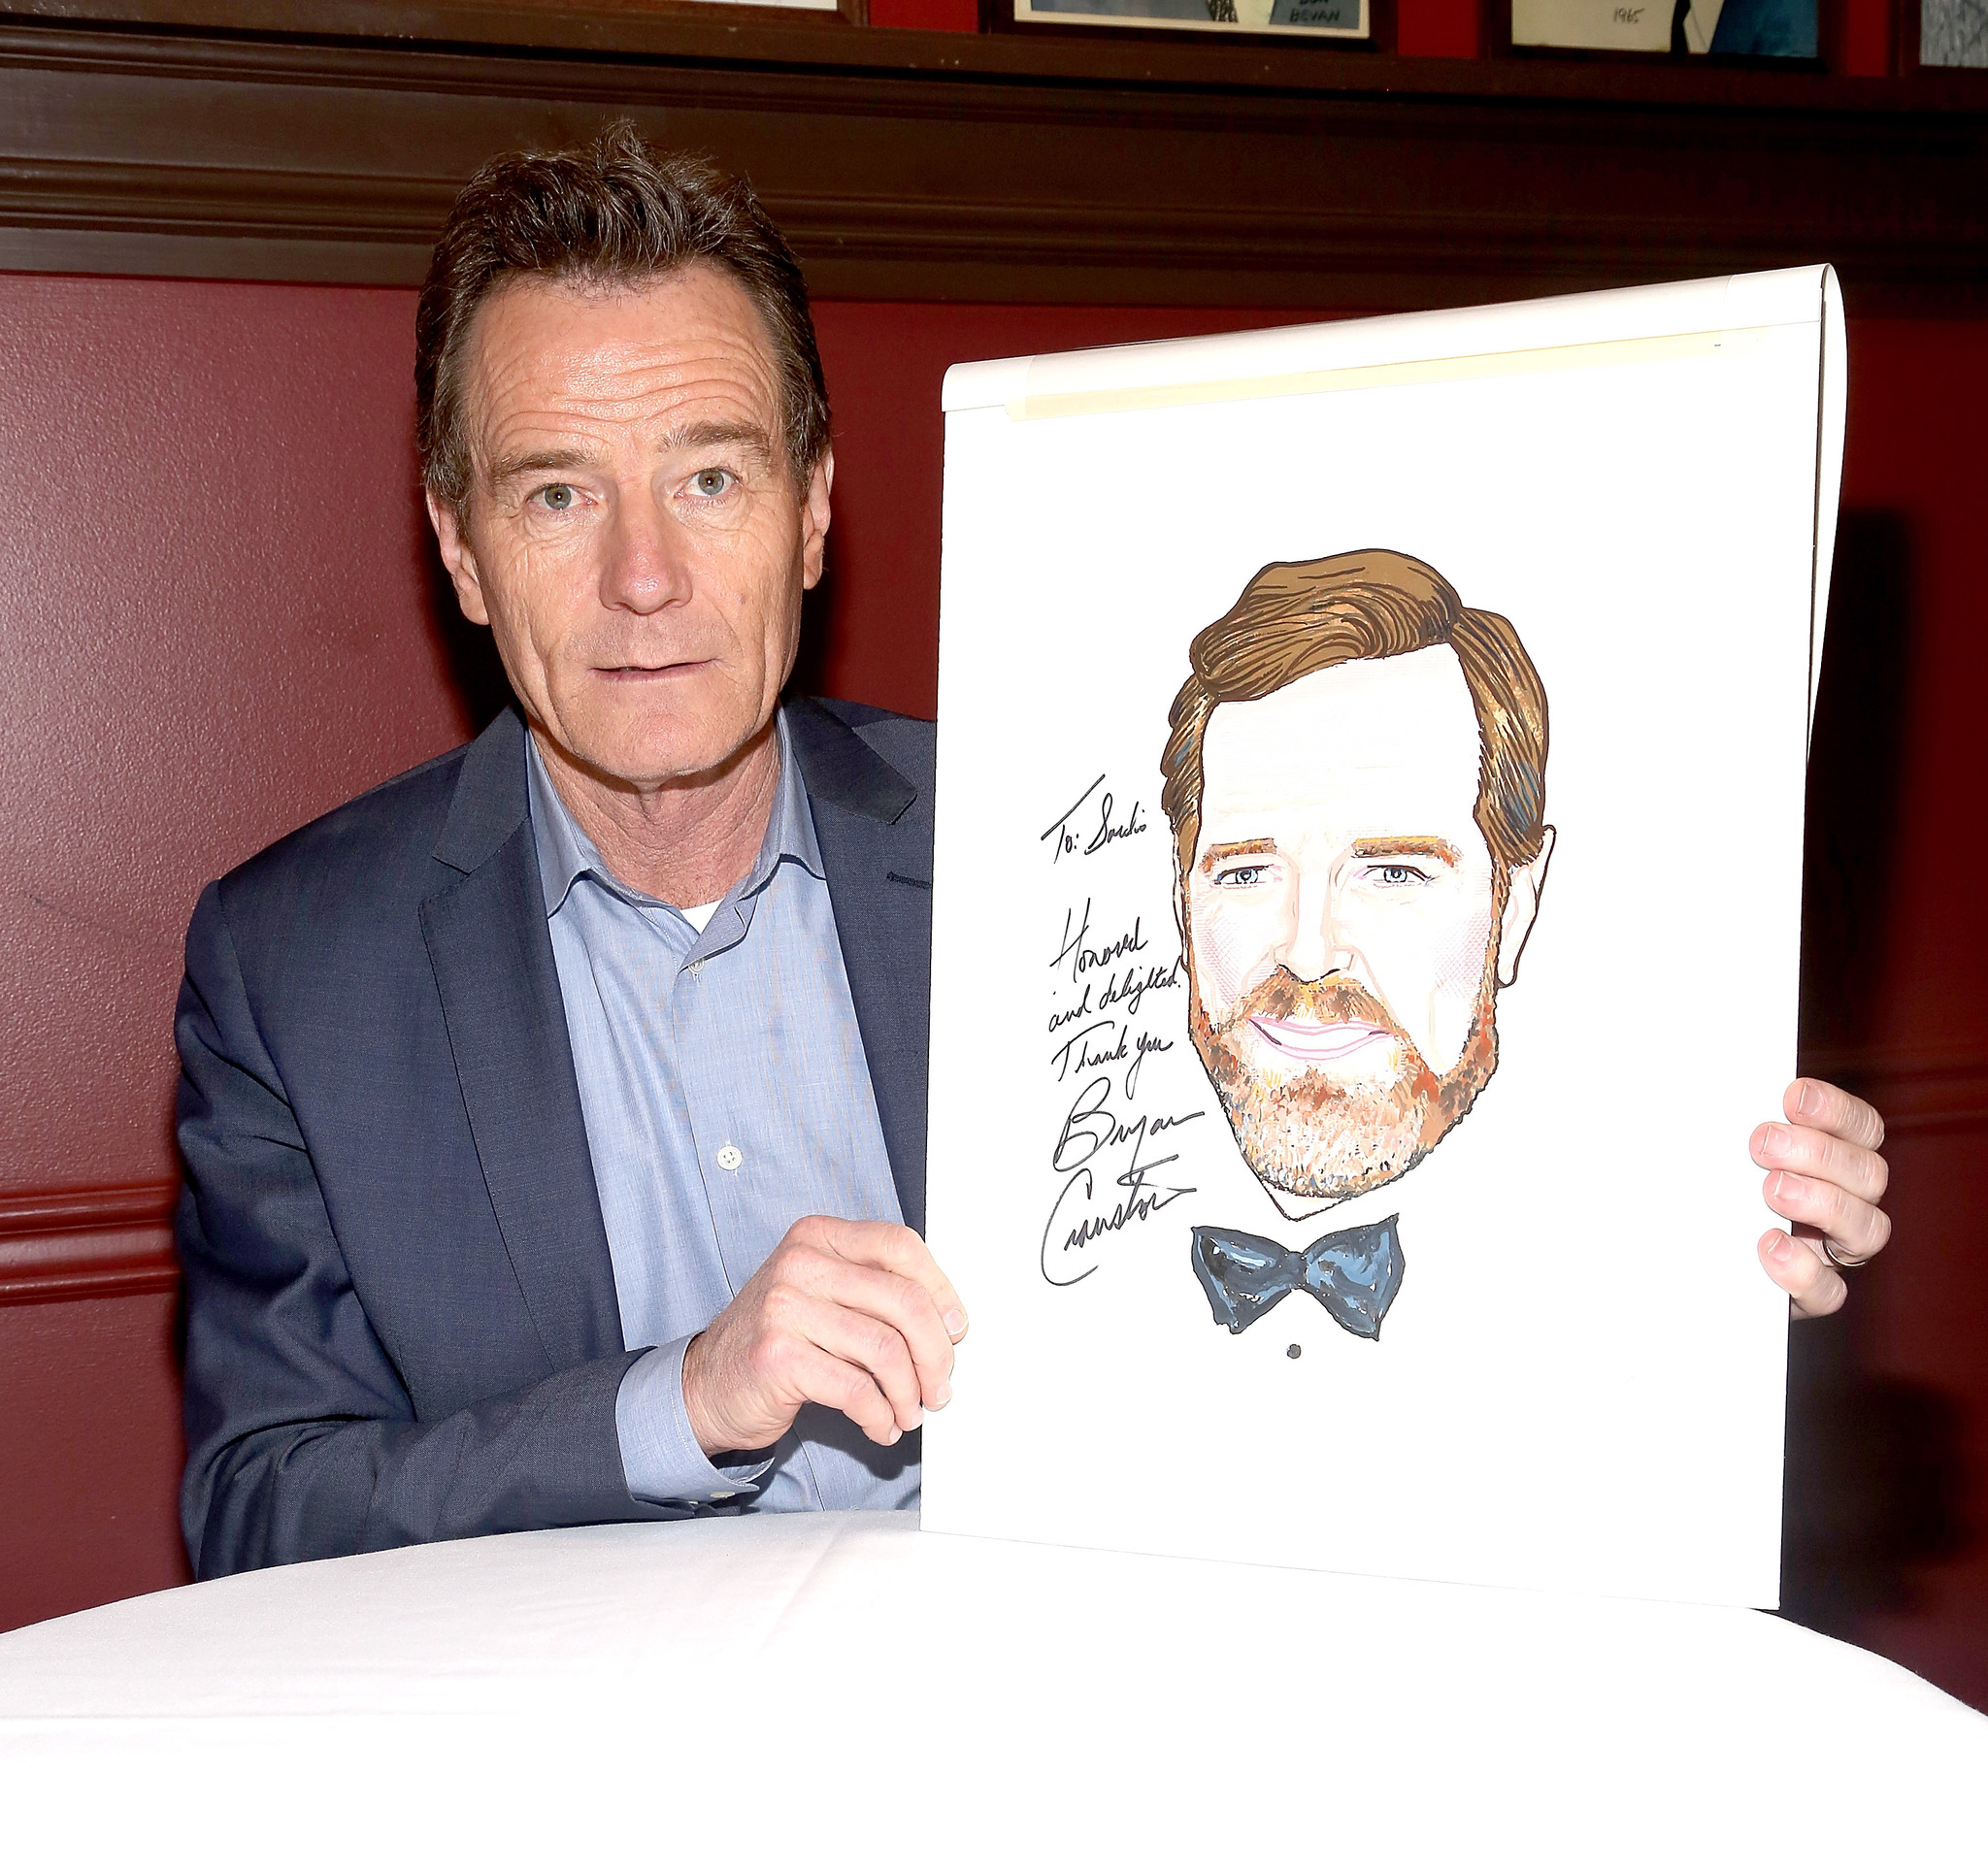 Bryan Cranston attends the Sardi's Caricature Unveiling for Bryan Cranston on May 29, 2014 in New York City.